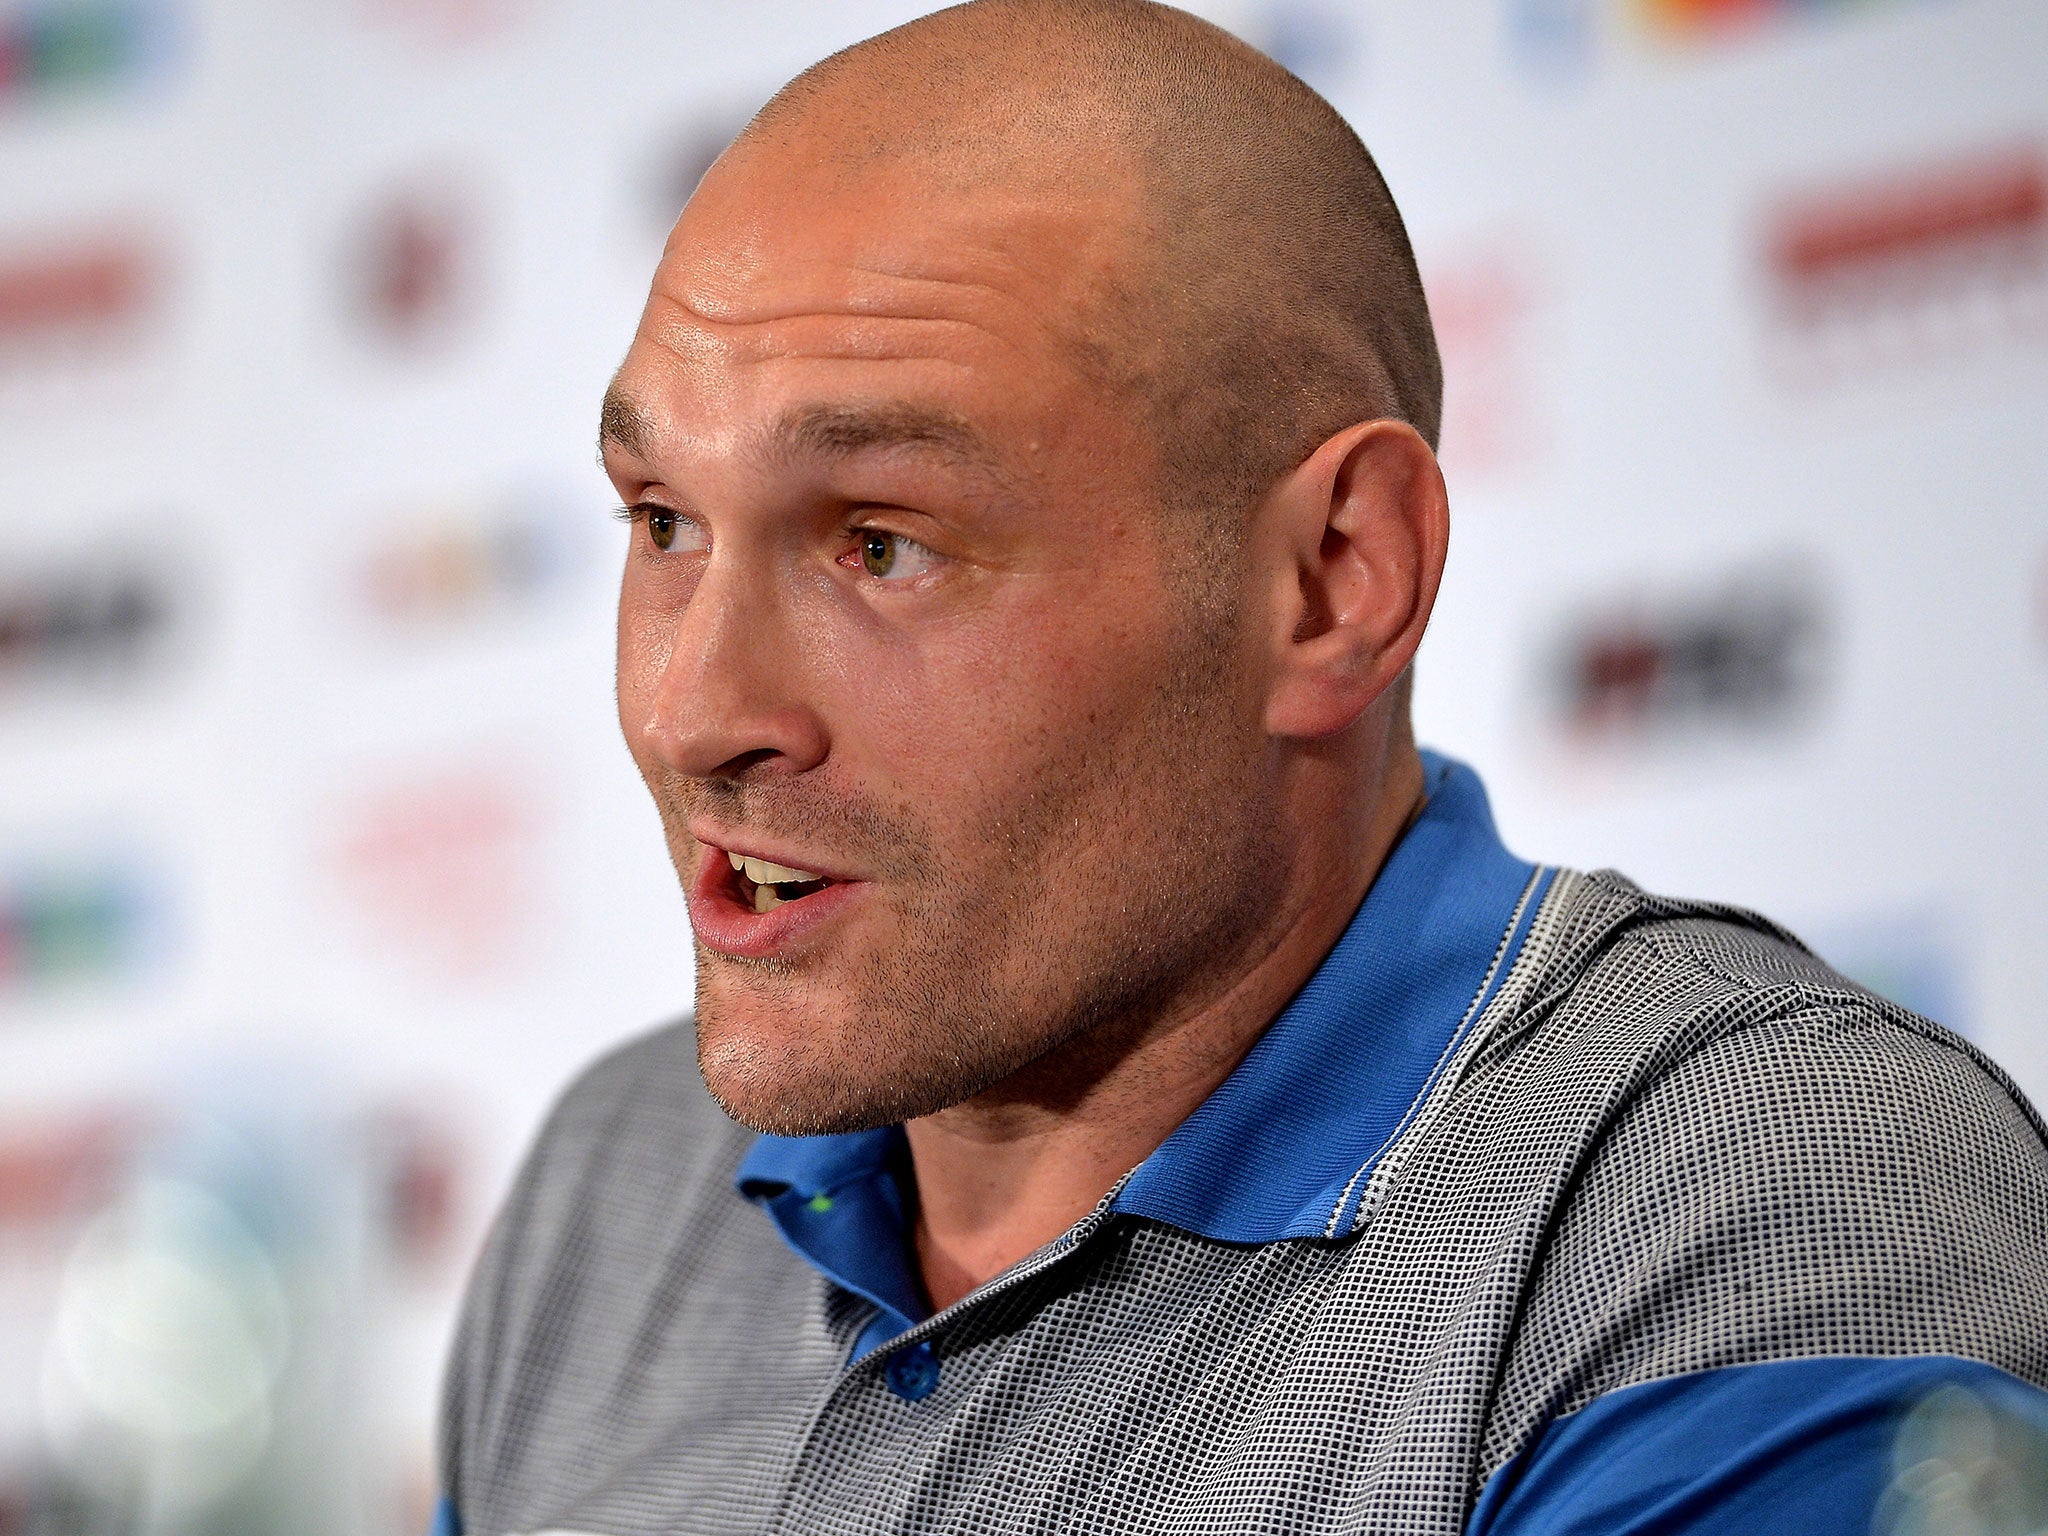 Tyson Fury believes drugs should be made legal in boxing in the future